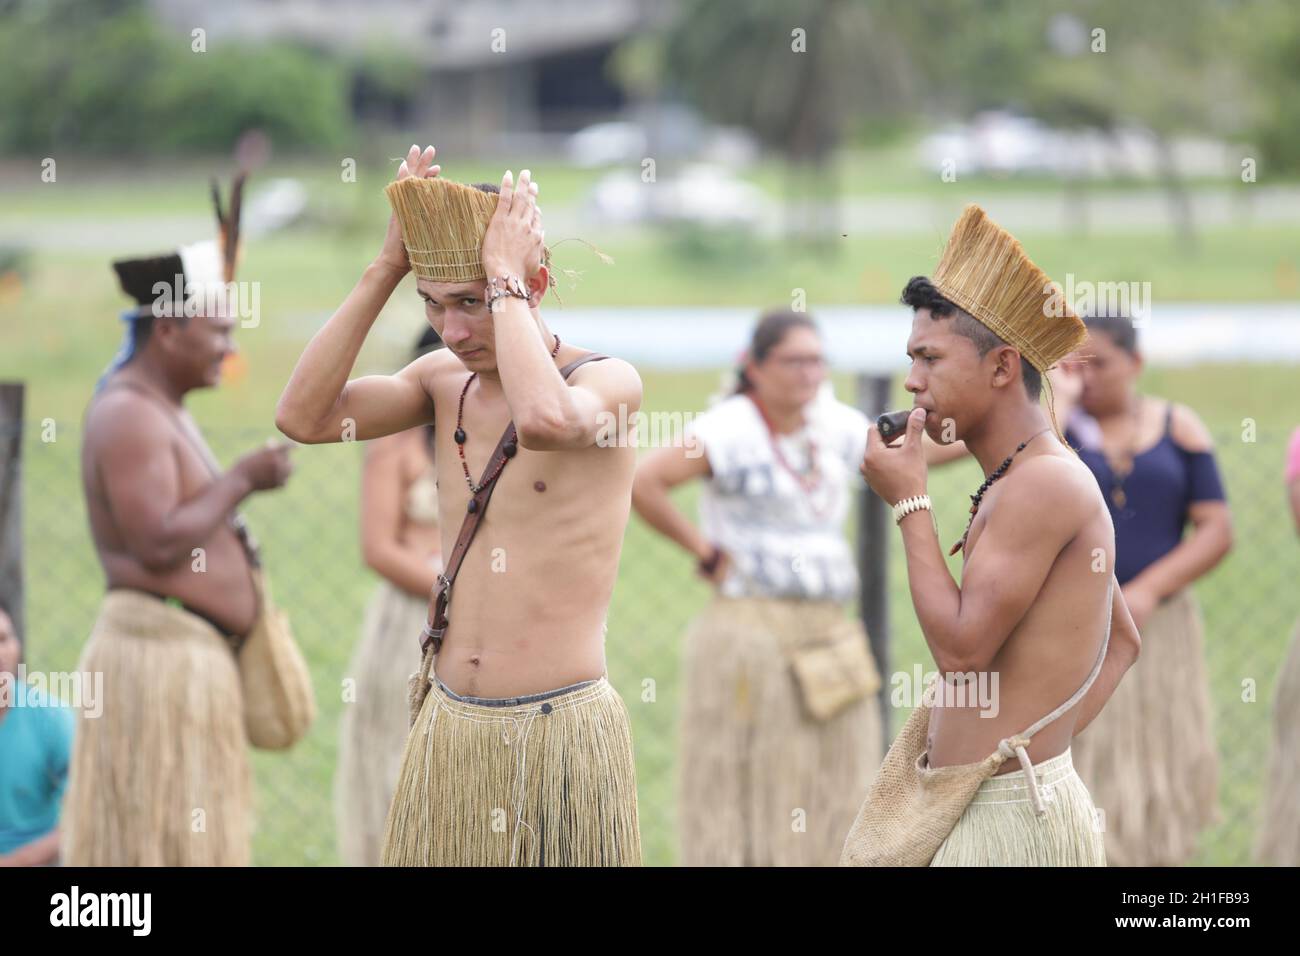 salvador, bahia / brazil - may 29, 2017: Indians from various Bahia tribes and ethnic groups camp in Salvador to discuss the political conjuncture and Stock Photo